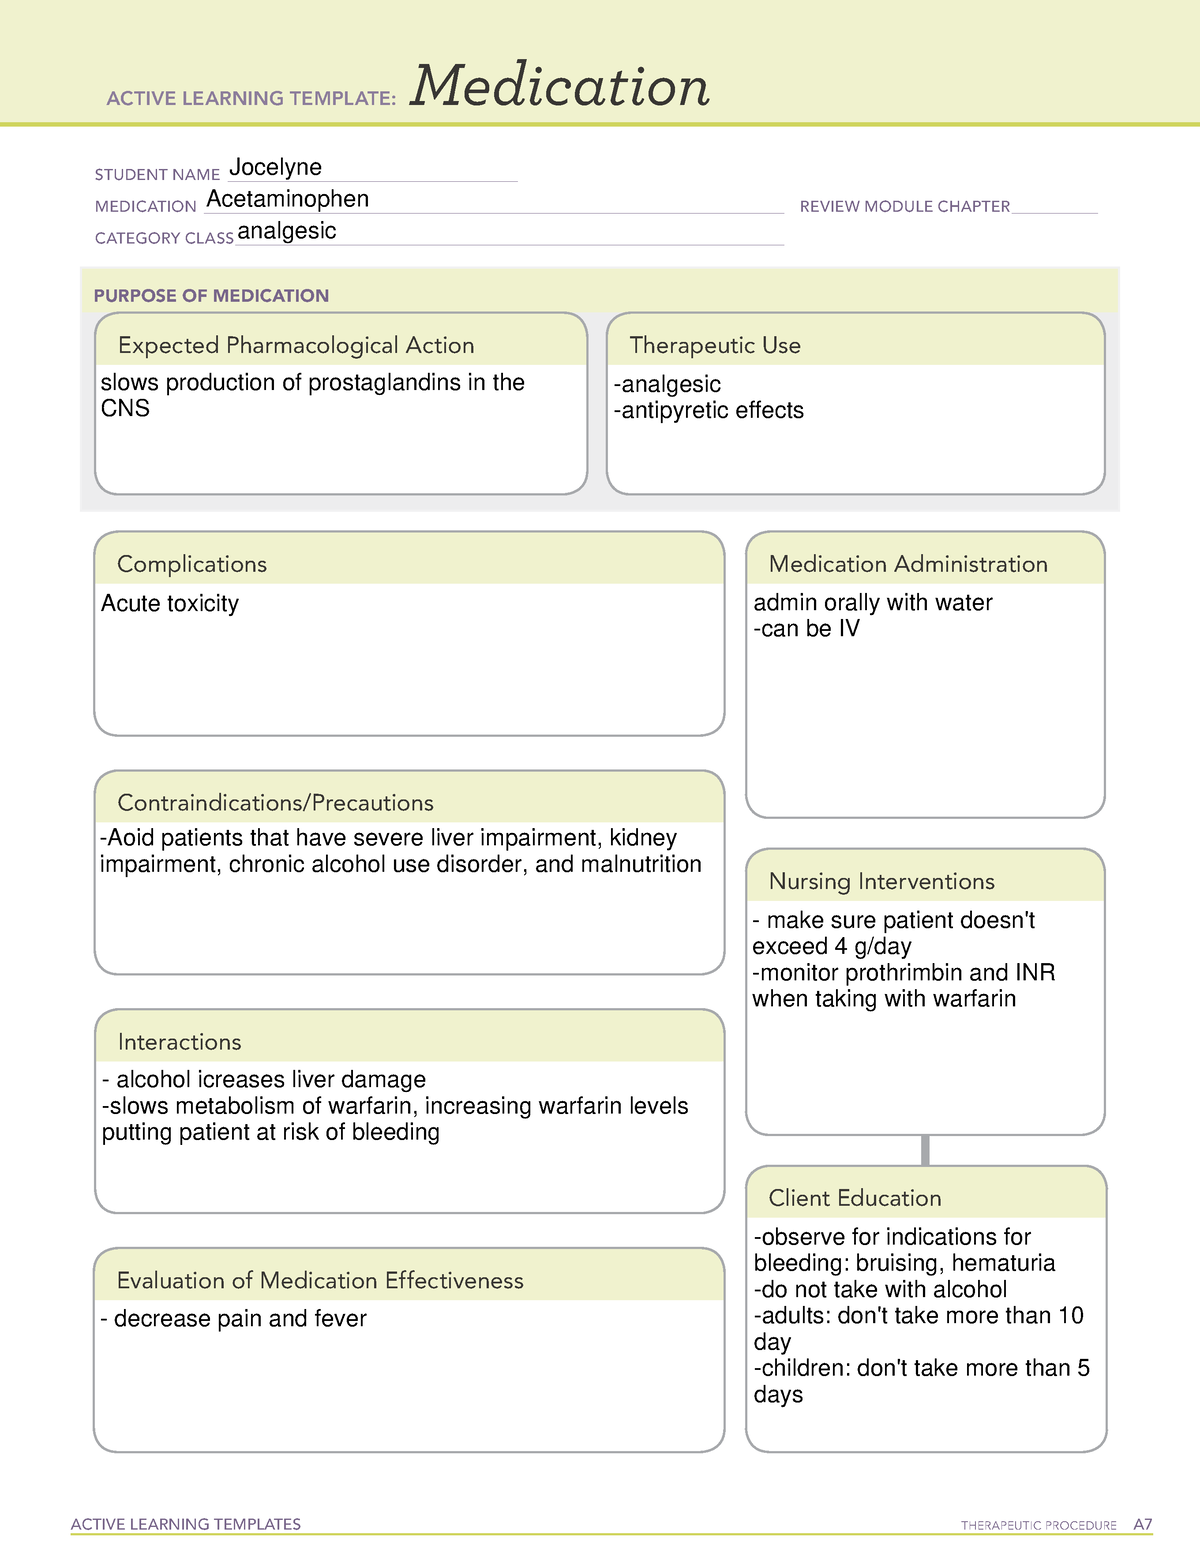 Acetaminophen medication card pain med ACTIVE LEARNING TEMPLATES